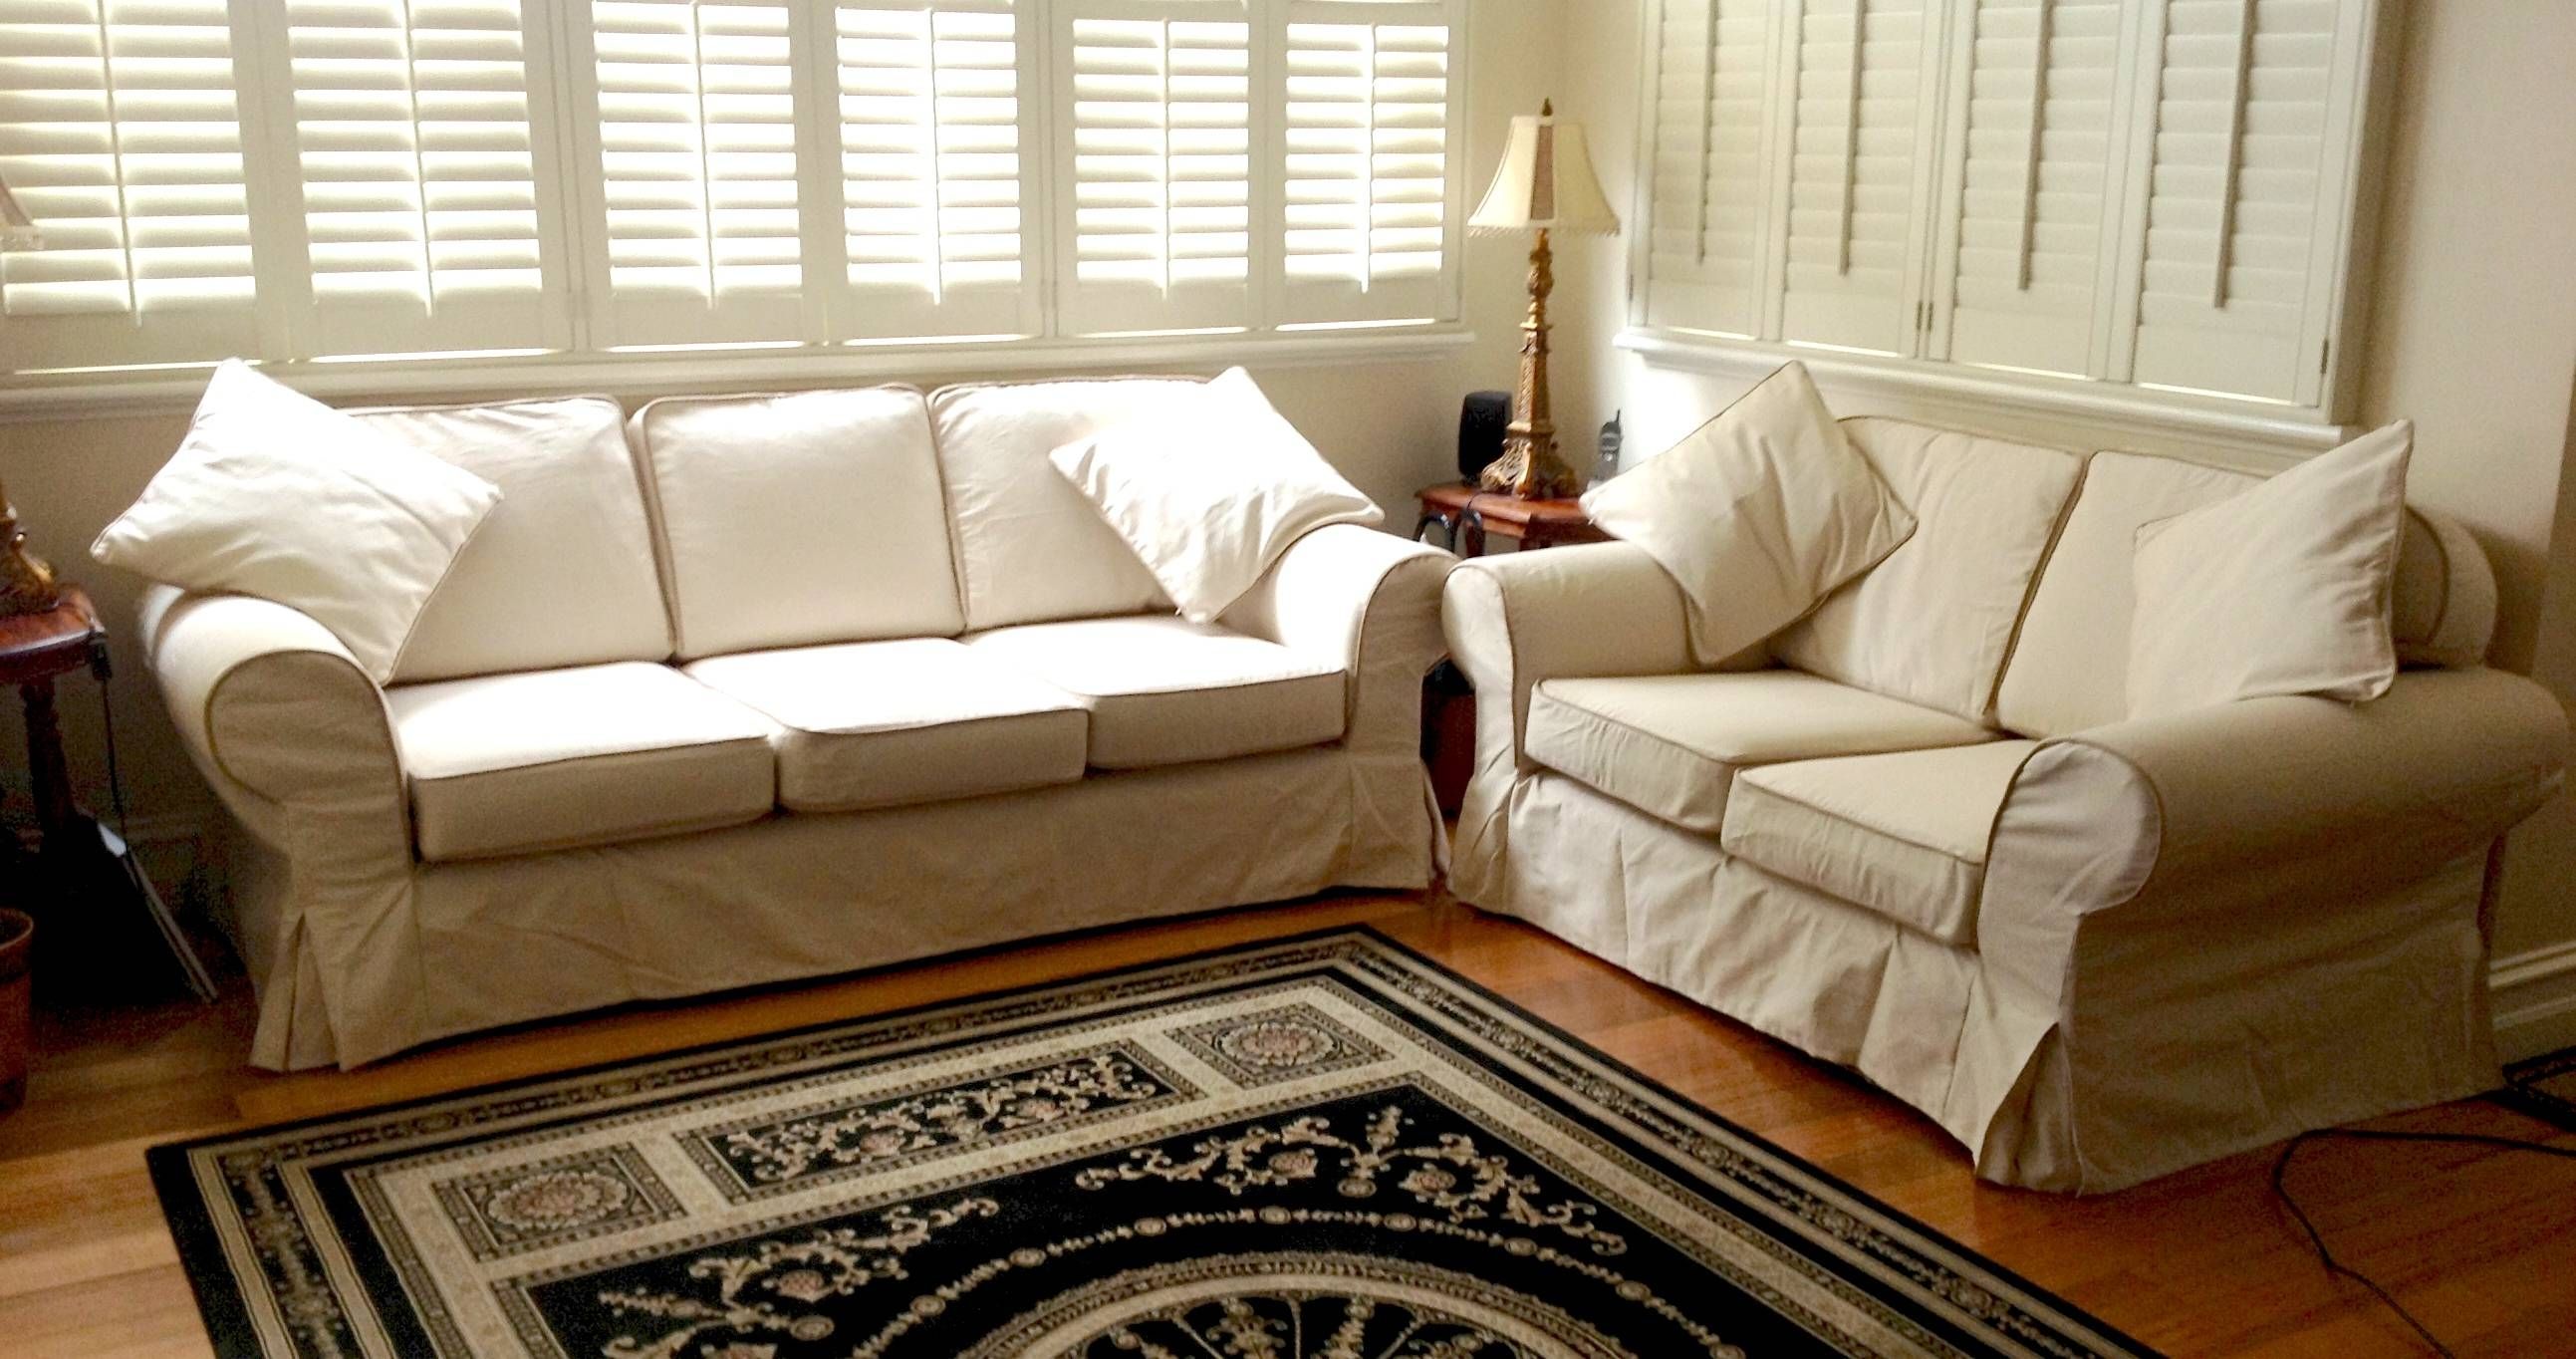 Custom Slipcovers And Couch Cover For Any Sofa Online Intended For Slipcovers For Sofas And Chairs (View 21 of 30)